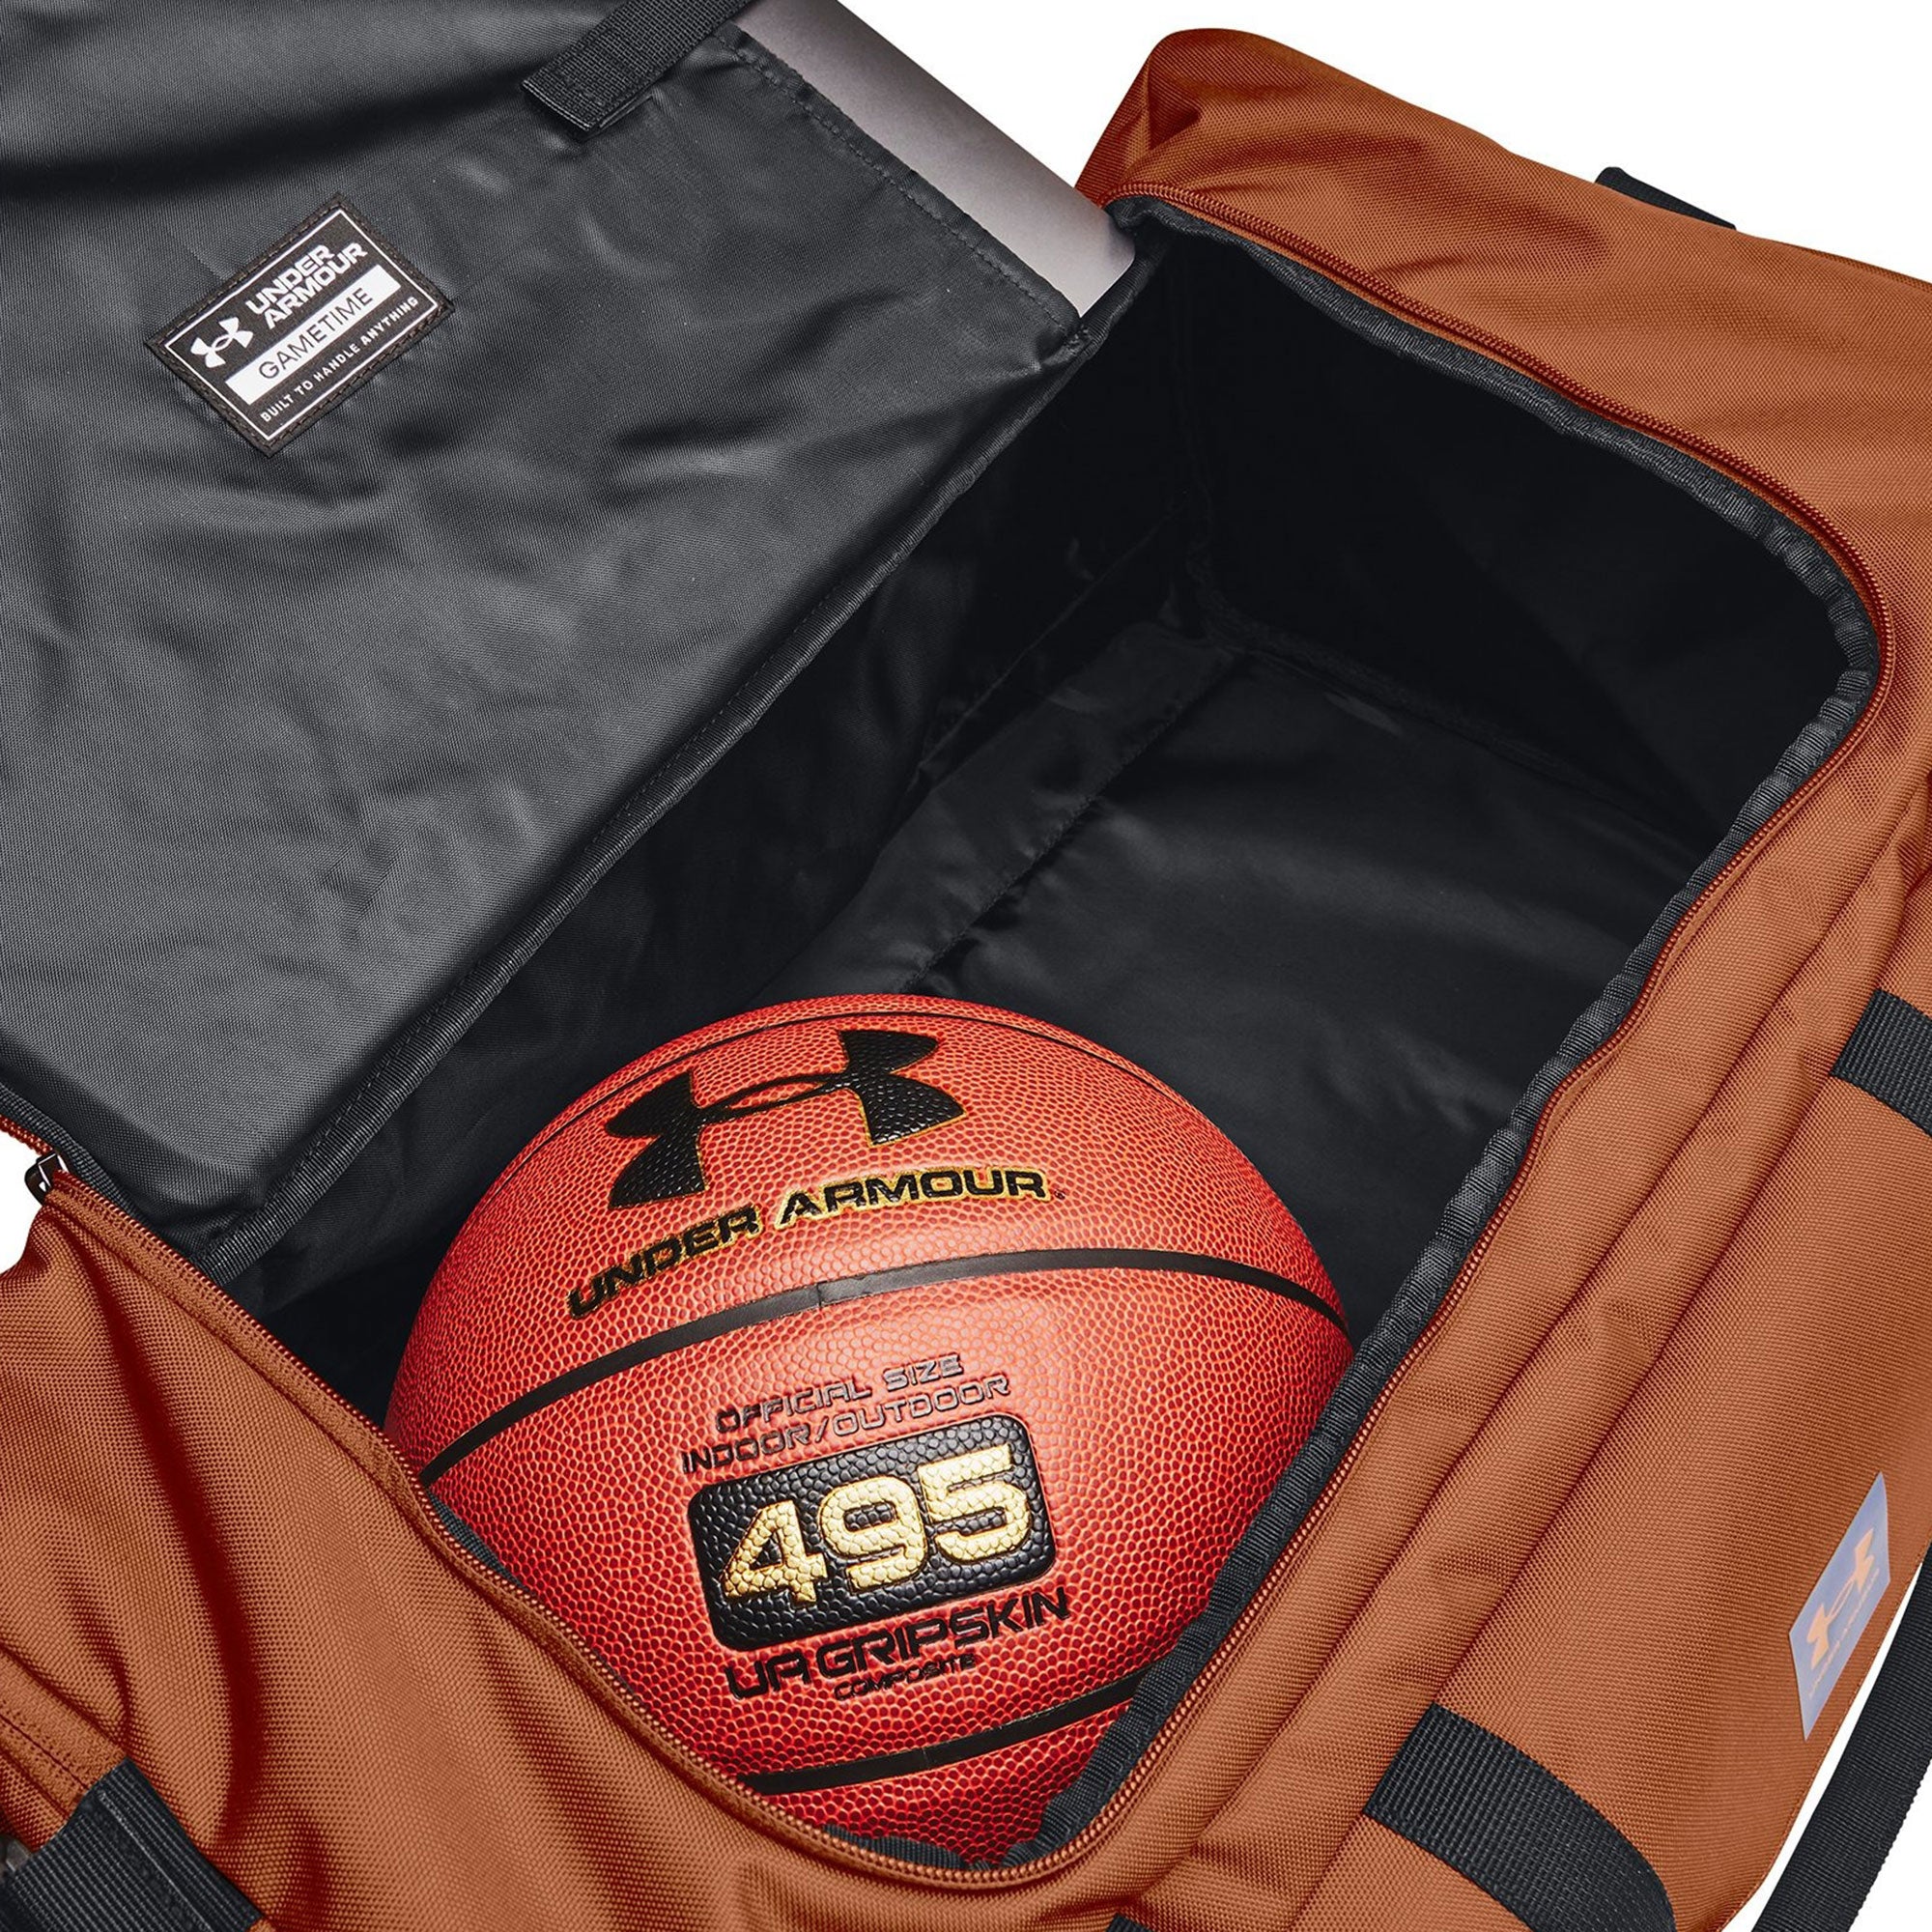 Túi Thể Thao Under Armour Gametime Duffle - Supersports Vietnam